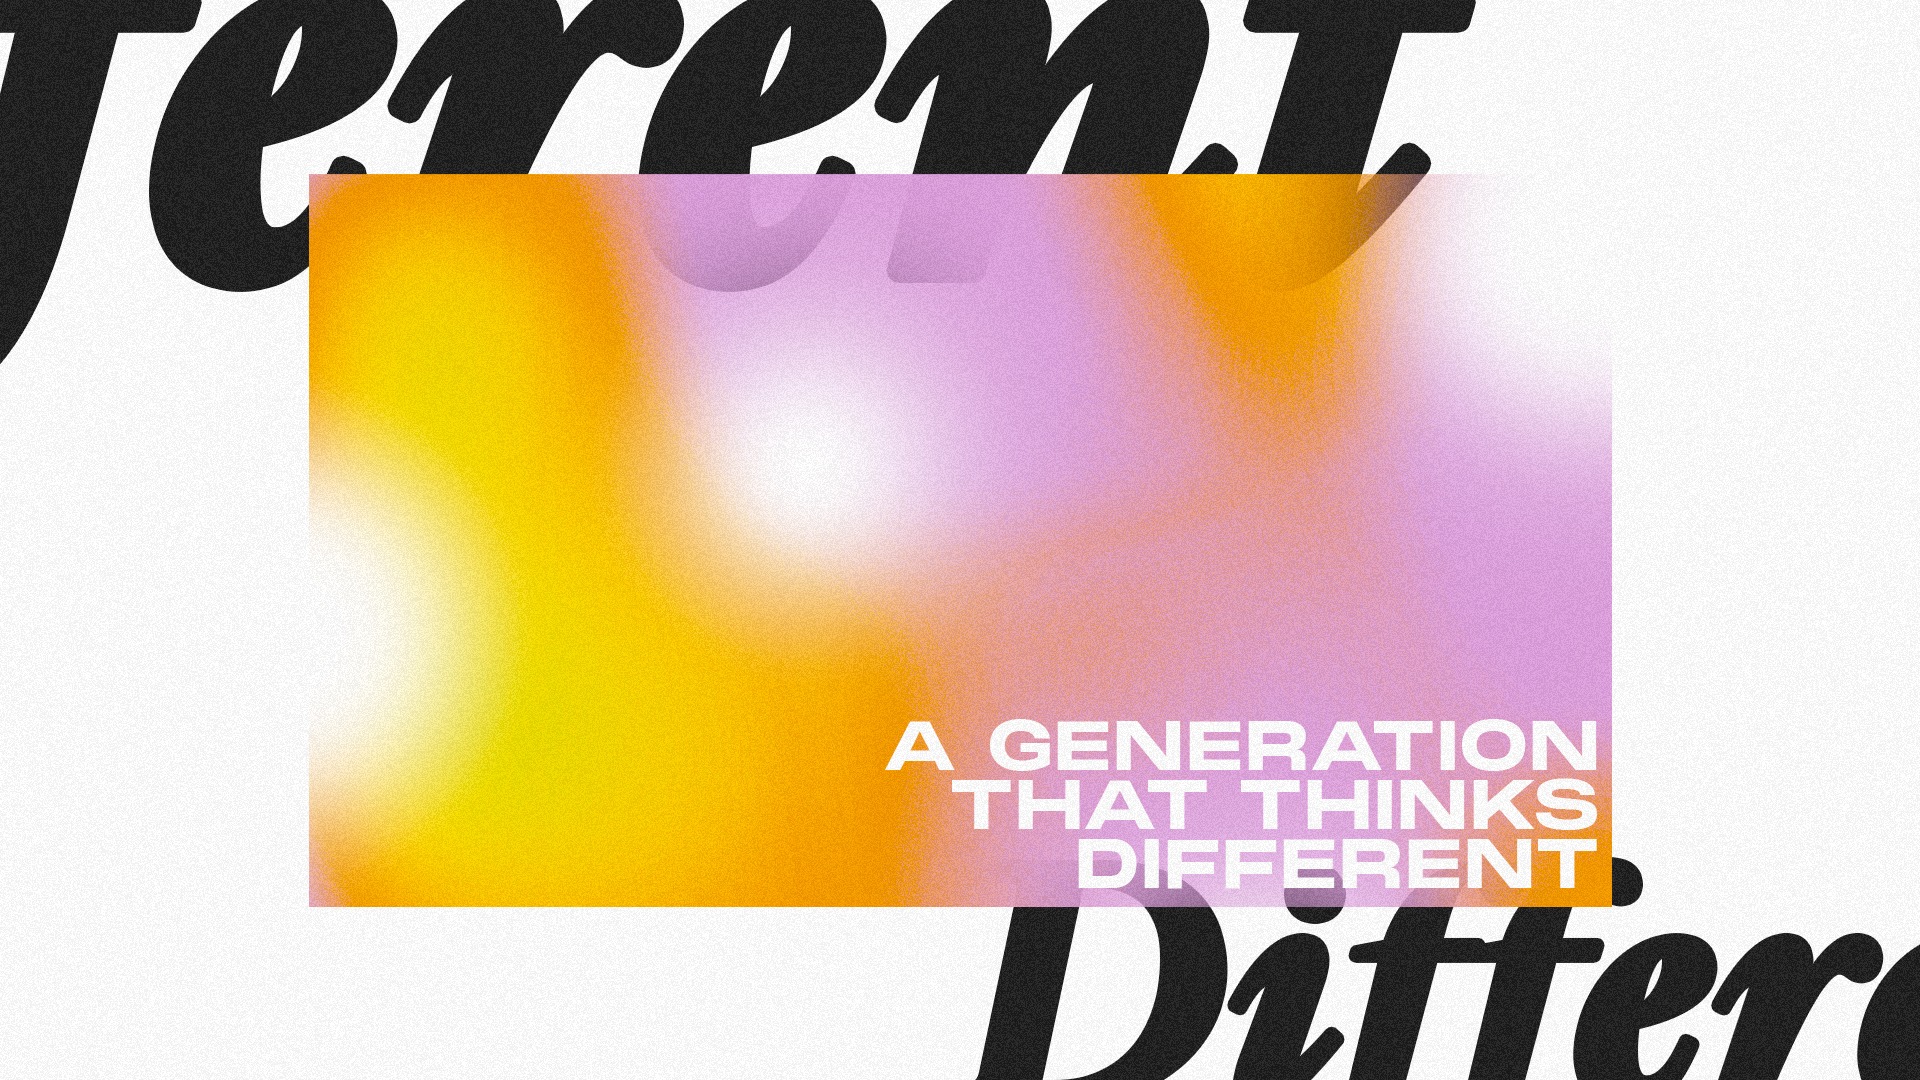 A Generation that thinks different 02 graphcis